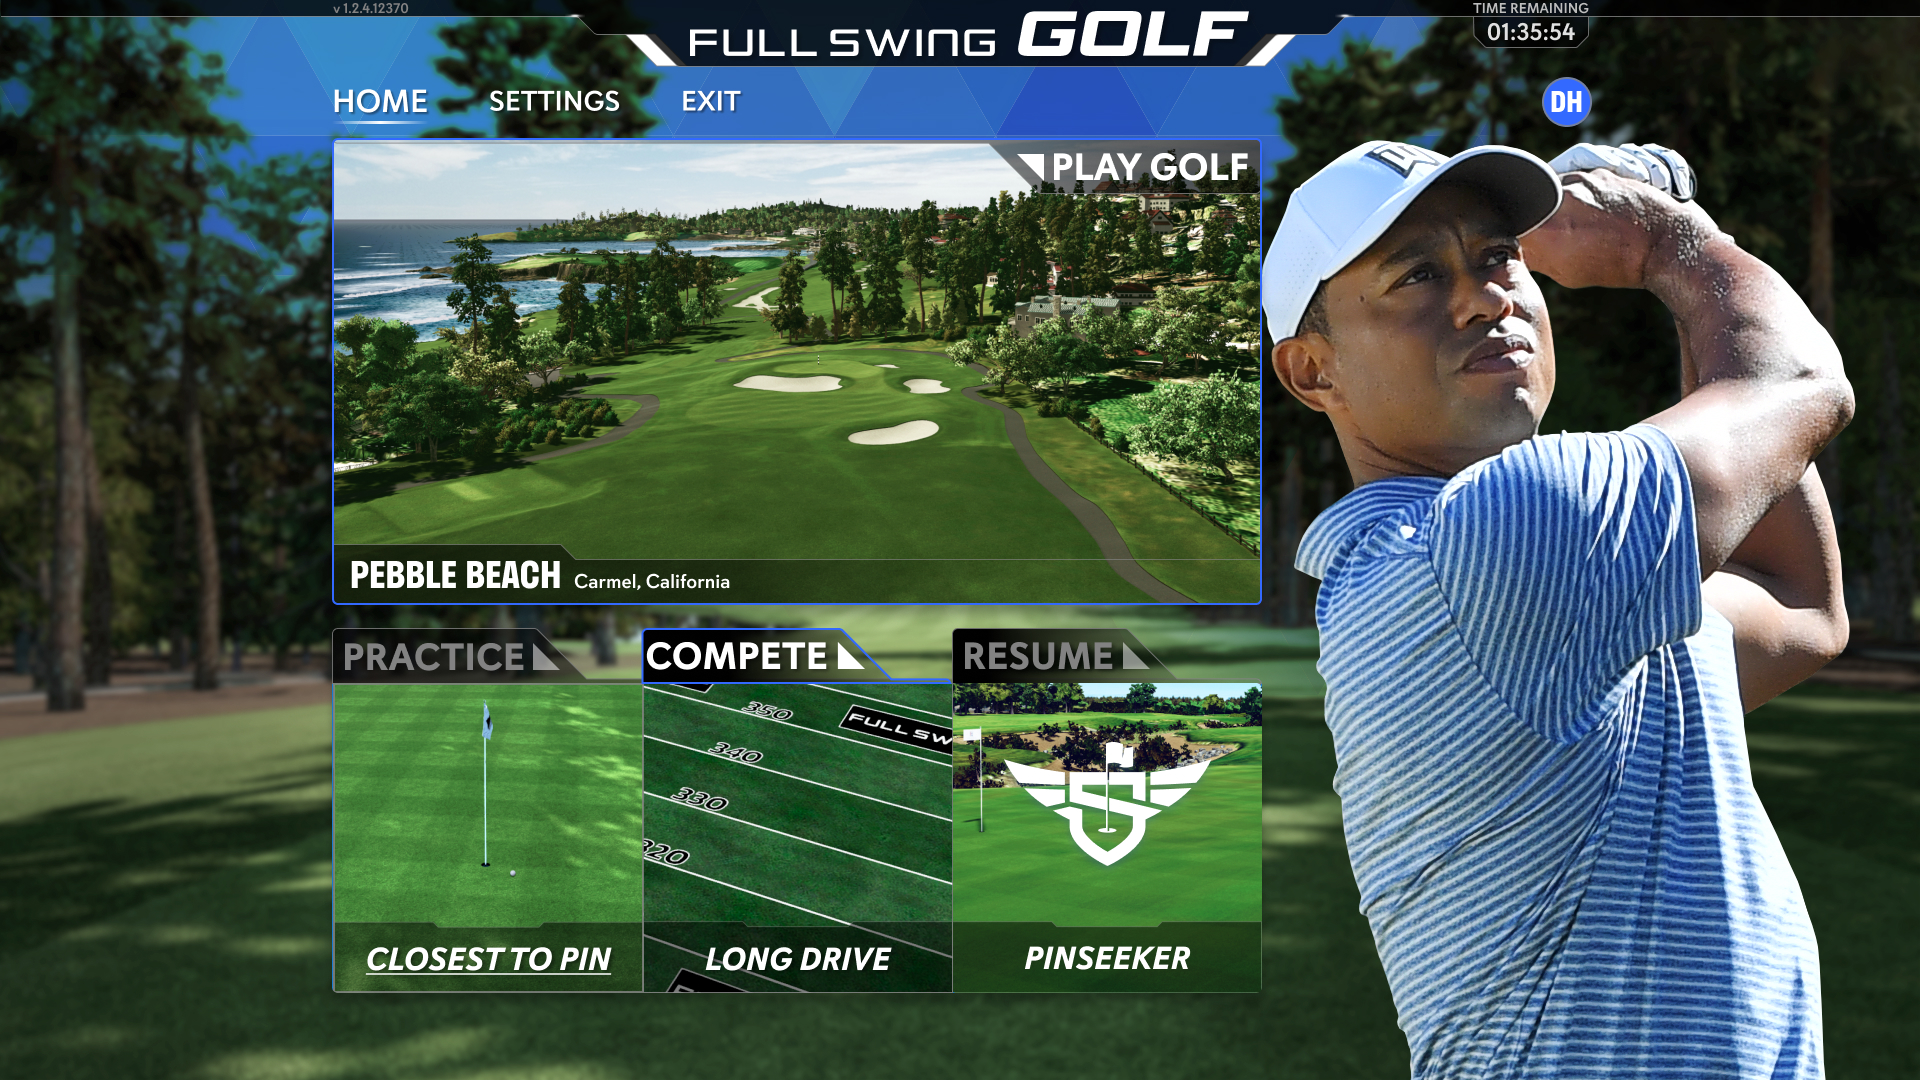 Full Swing Golf Software Compatible With PinSeeker